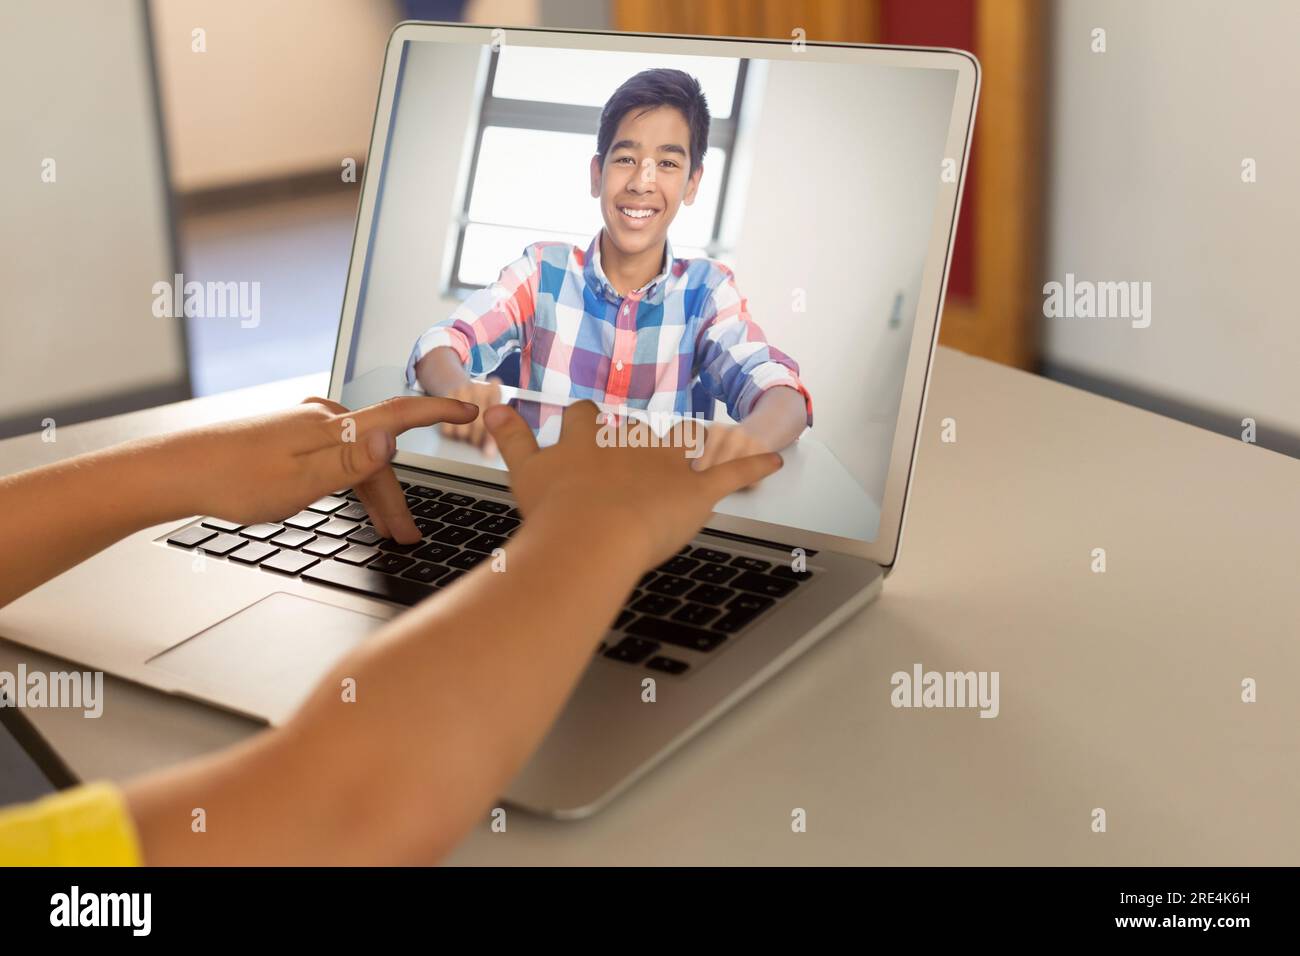 Mid section of a boy using laptop while having a video call with indian boy at home Stock Photo